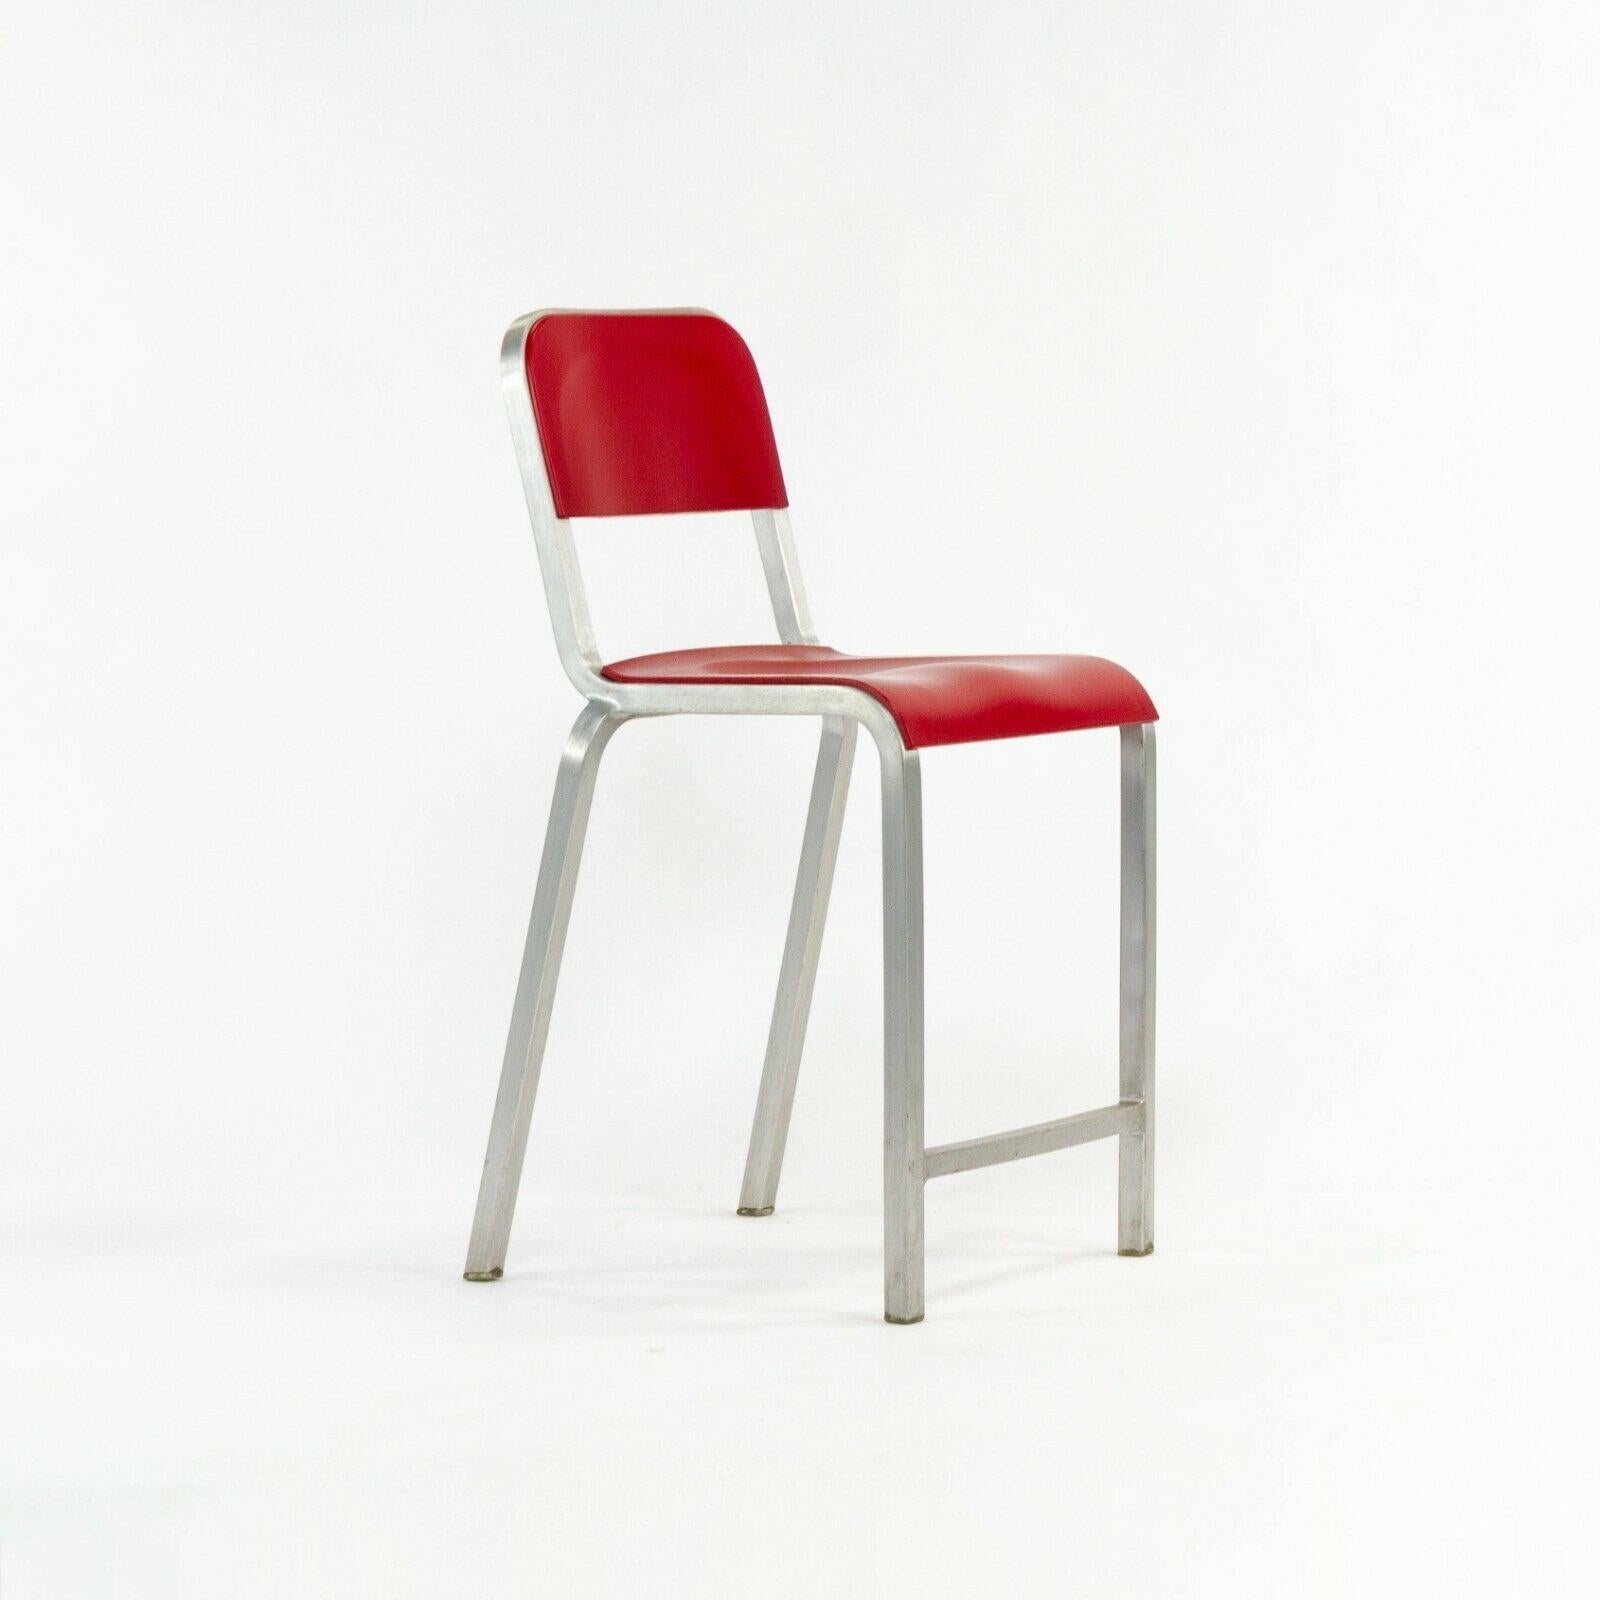 Modern 2010s Emeco 1951 Red Counter Stool by Adrian van Hooydonk and BMW Designworks For Sale